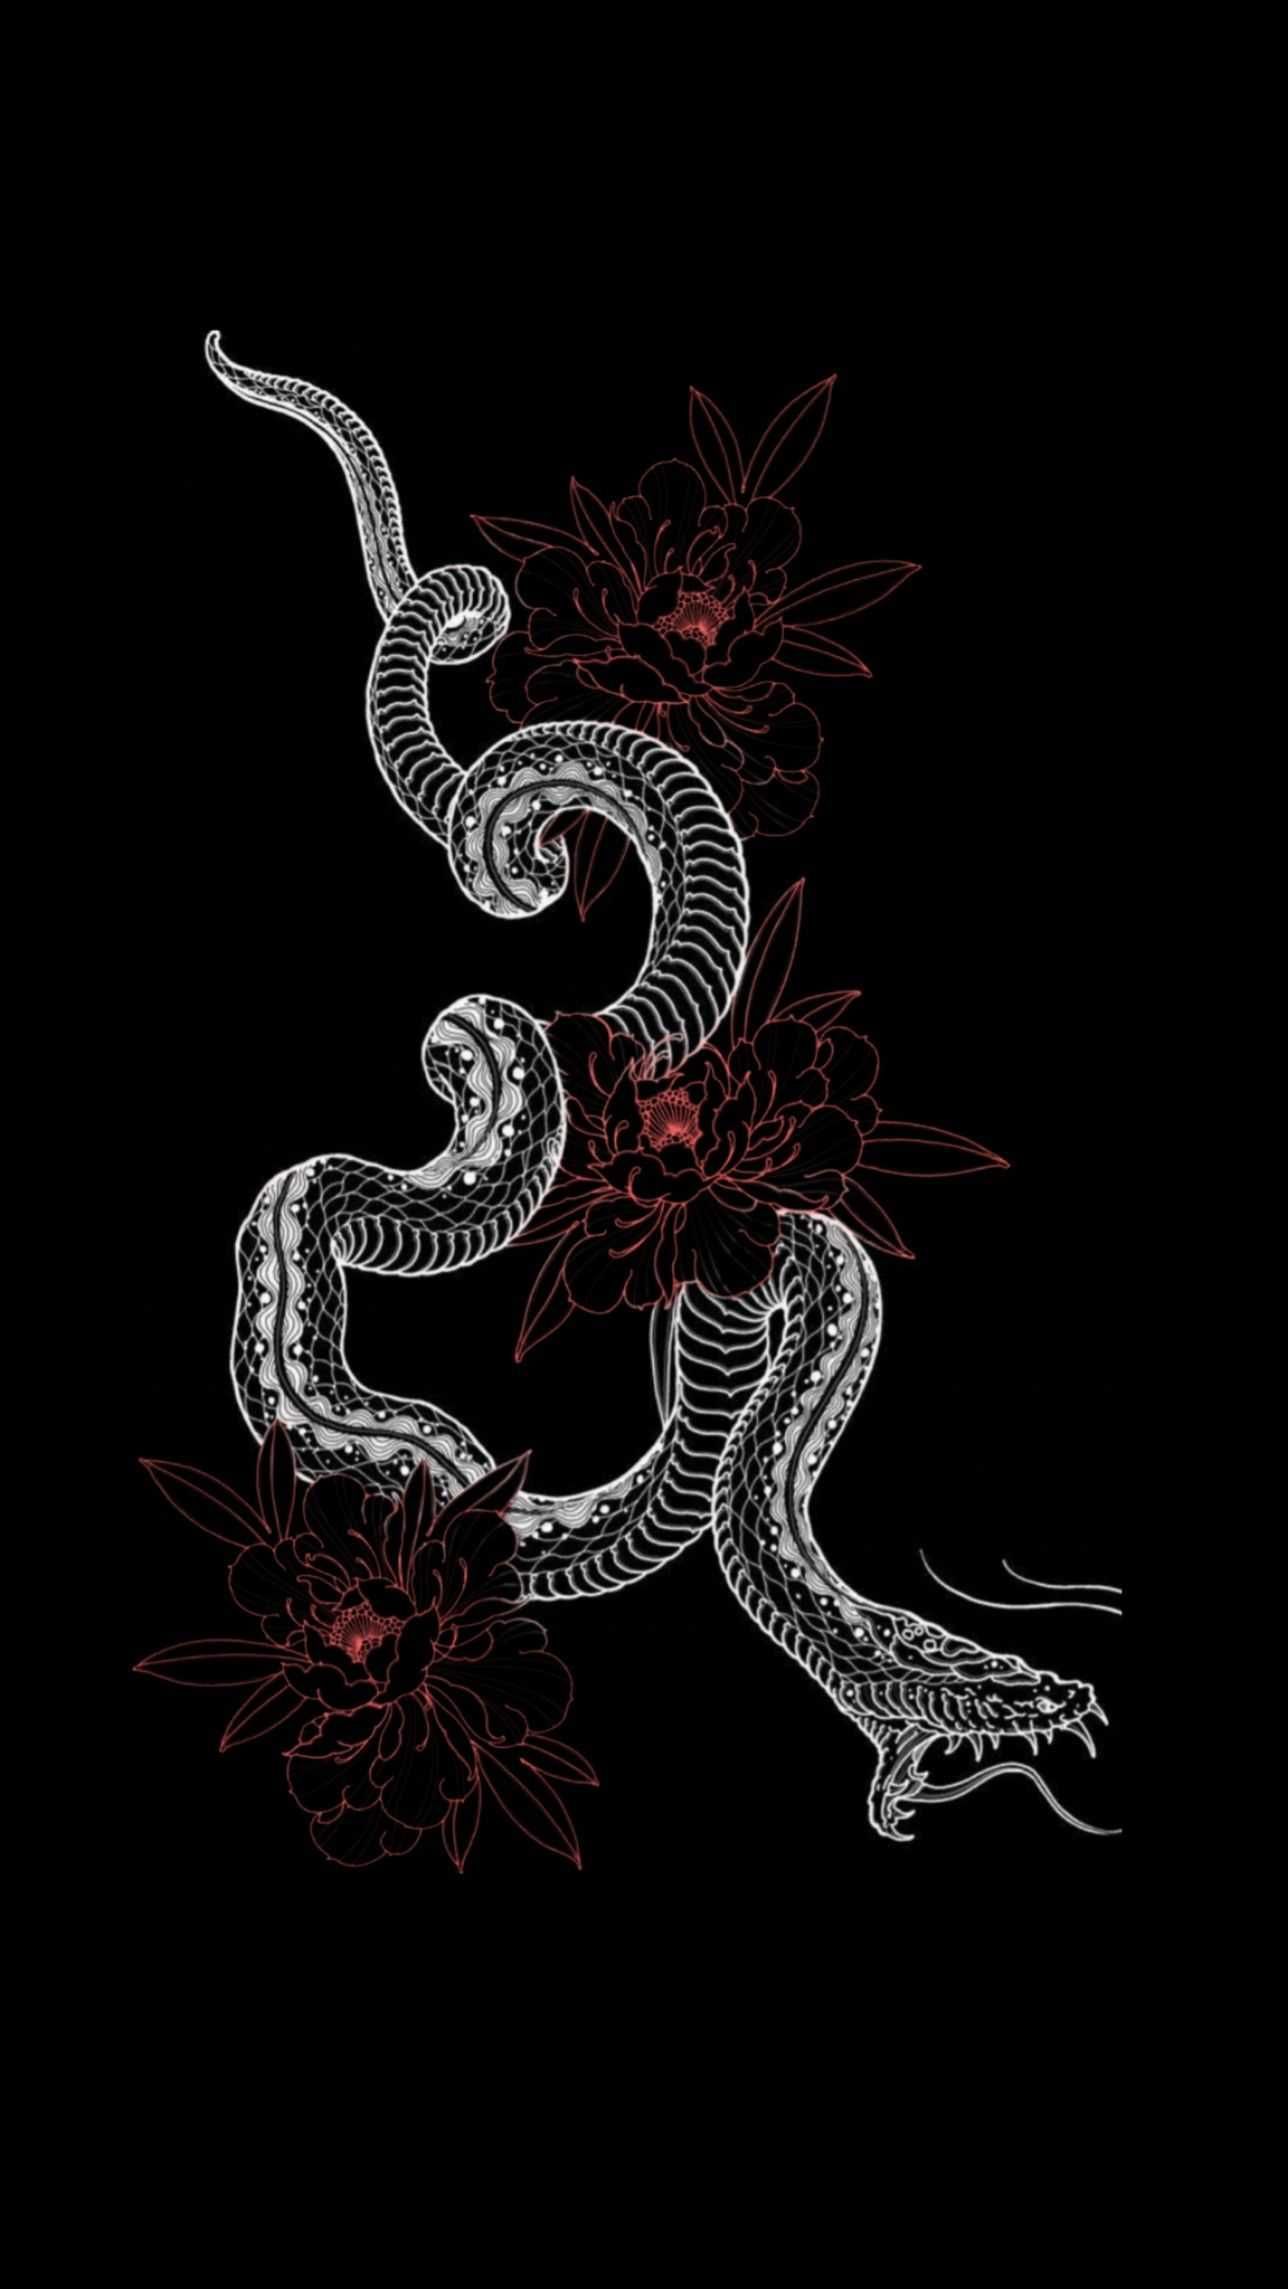 Japanese Dragon Wallpapers Discover more Aesthetic Japan Dragon